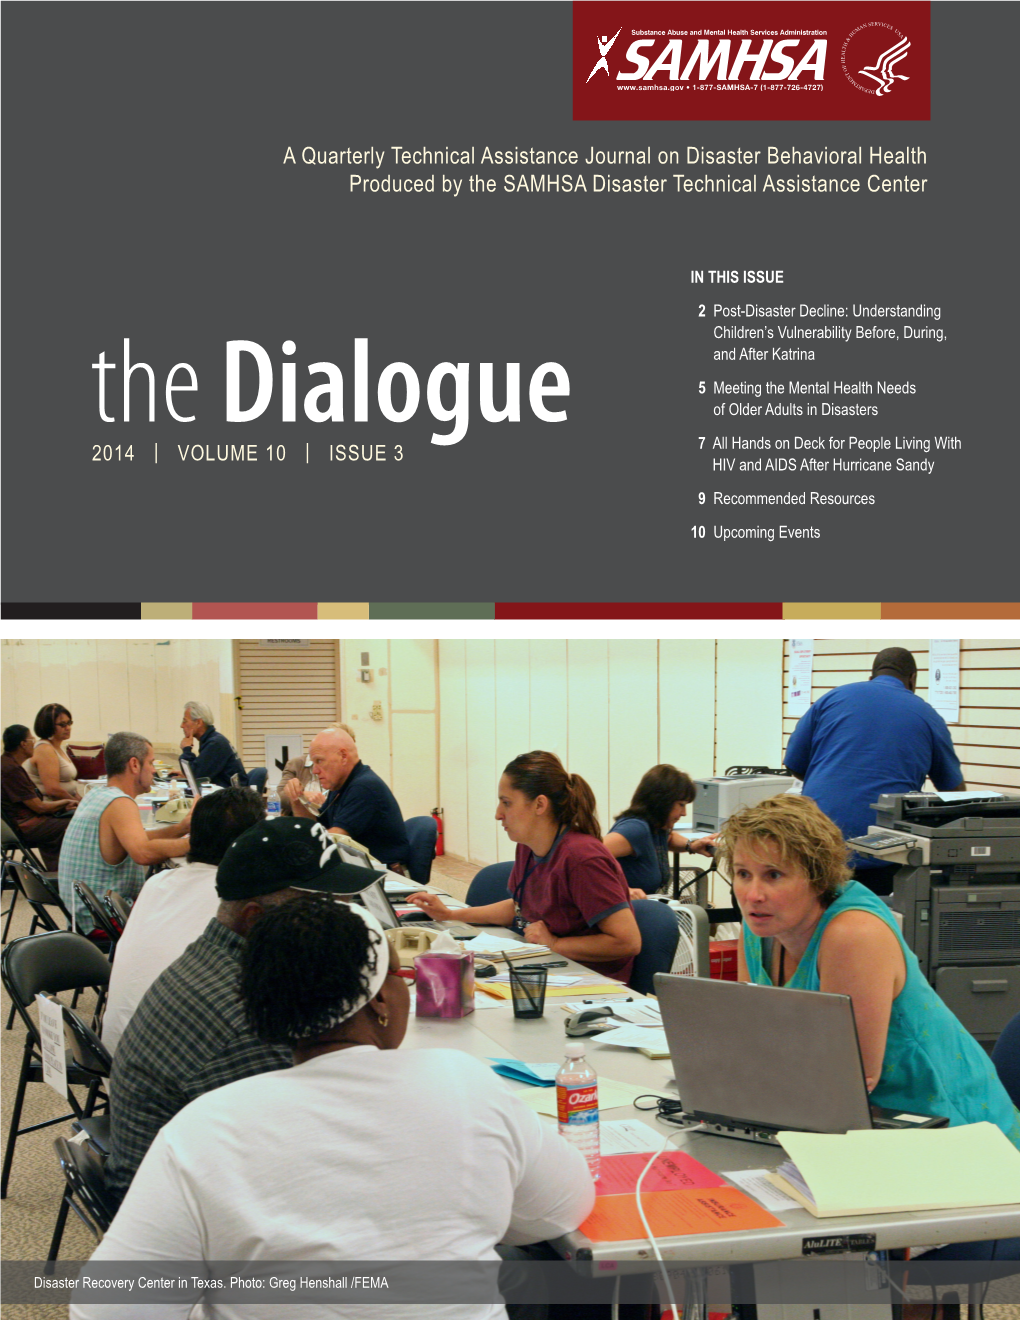 The Dialogue 2014. Volume 10, Issue 3